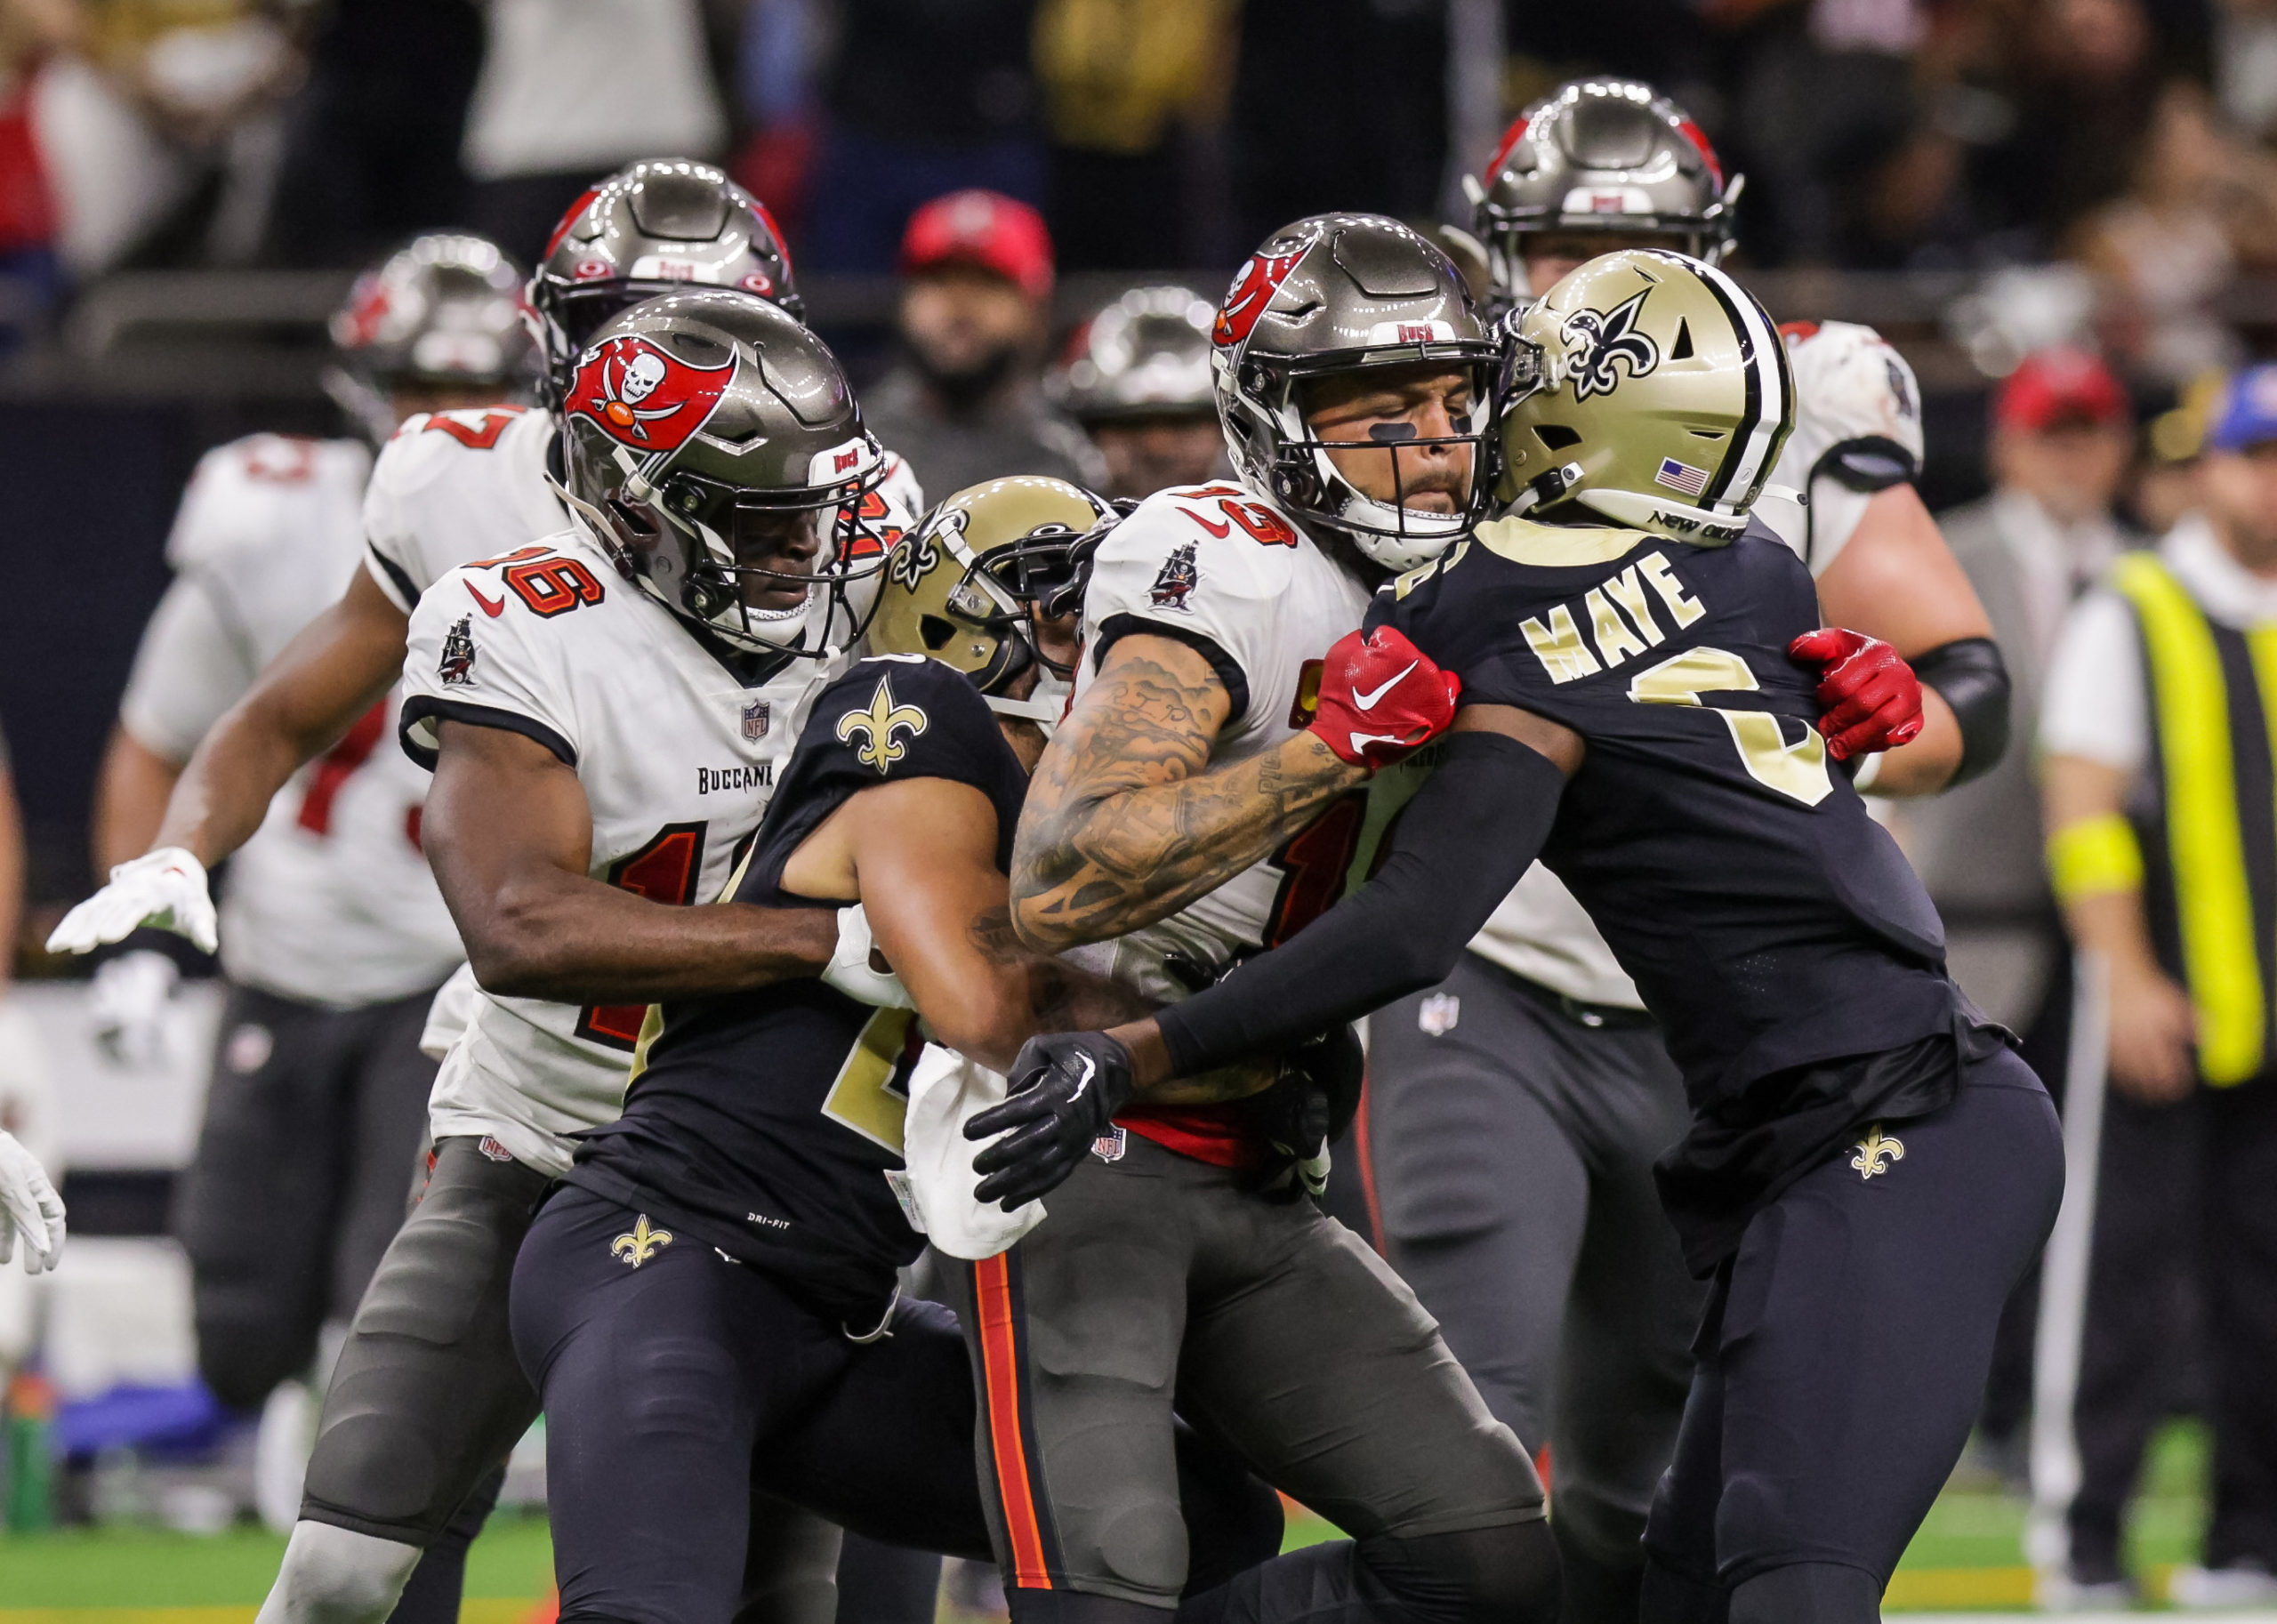 Players Can Go to ‘Dark Place’ But Bucs’ Mike Evans Crossed Line